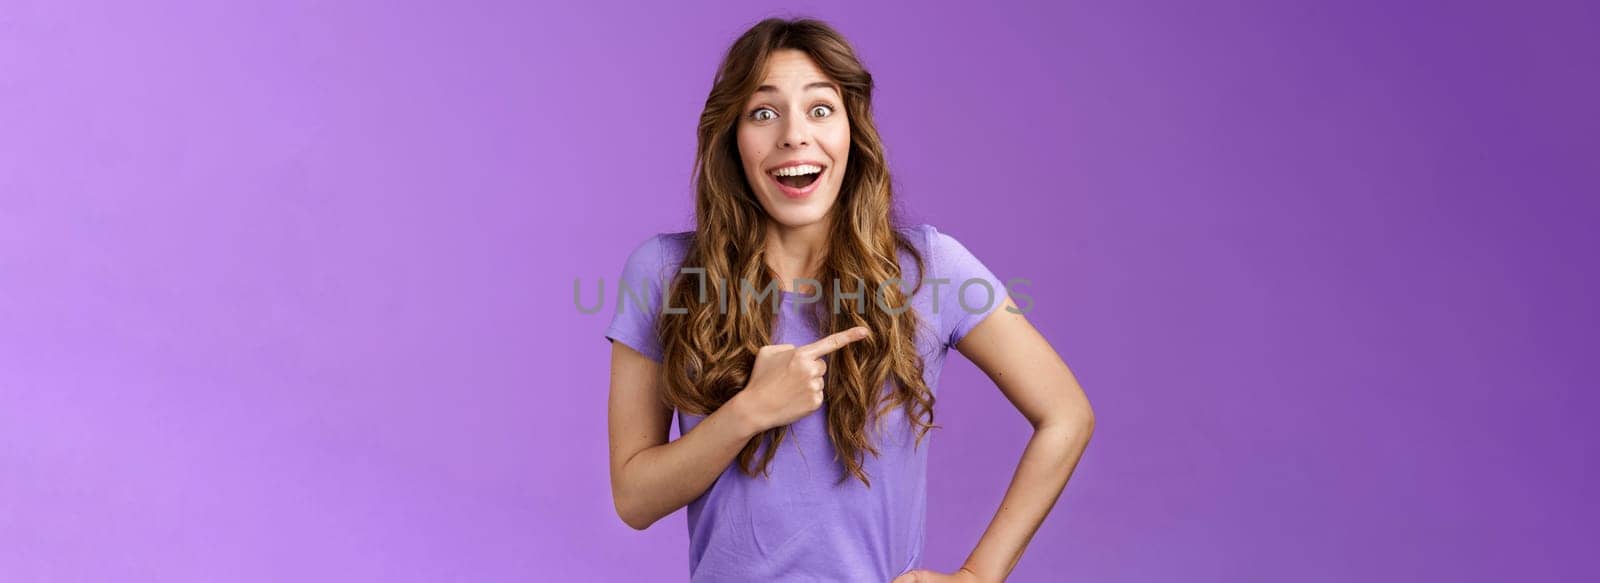 Lively excited enthuasitic good-looking woman curly hairstyle open mouth fascinated look admiration joy share awesome place location pointing left smiling broaldy thrilled purple background.